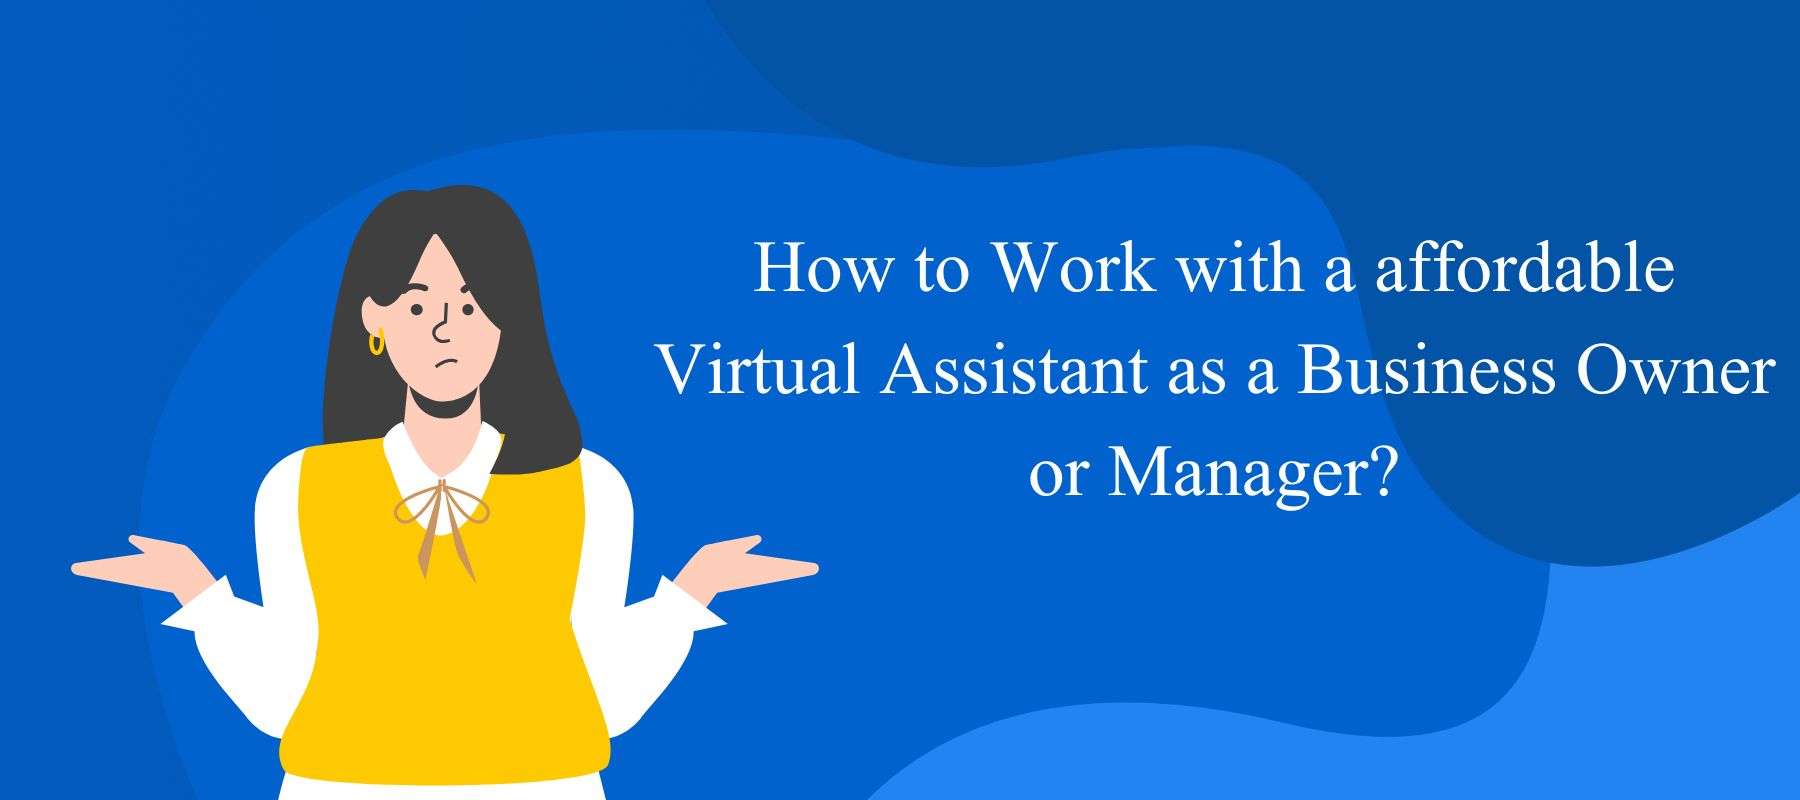 How to Work with a affordable Virtual Assistant as a Business Owner or Manager